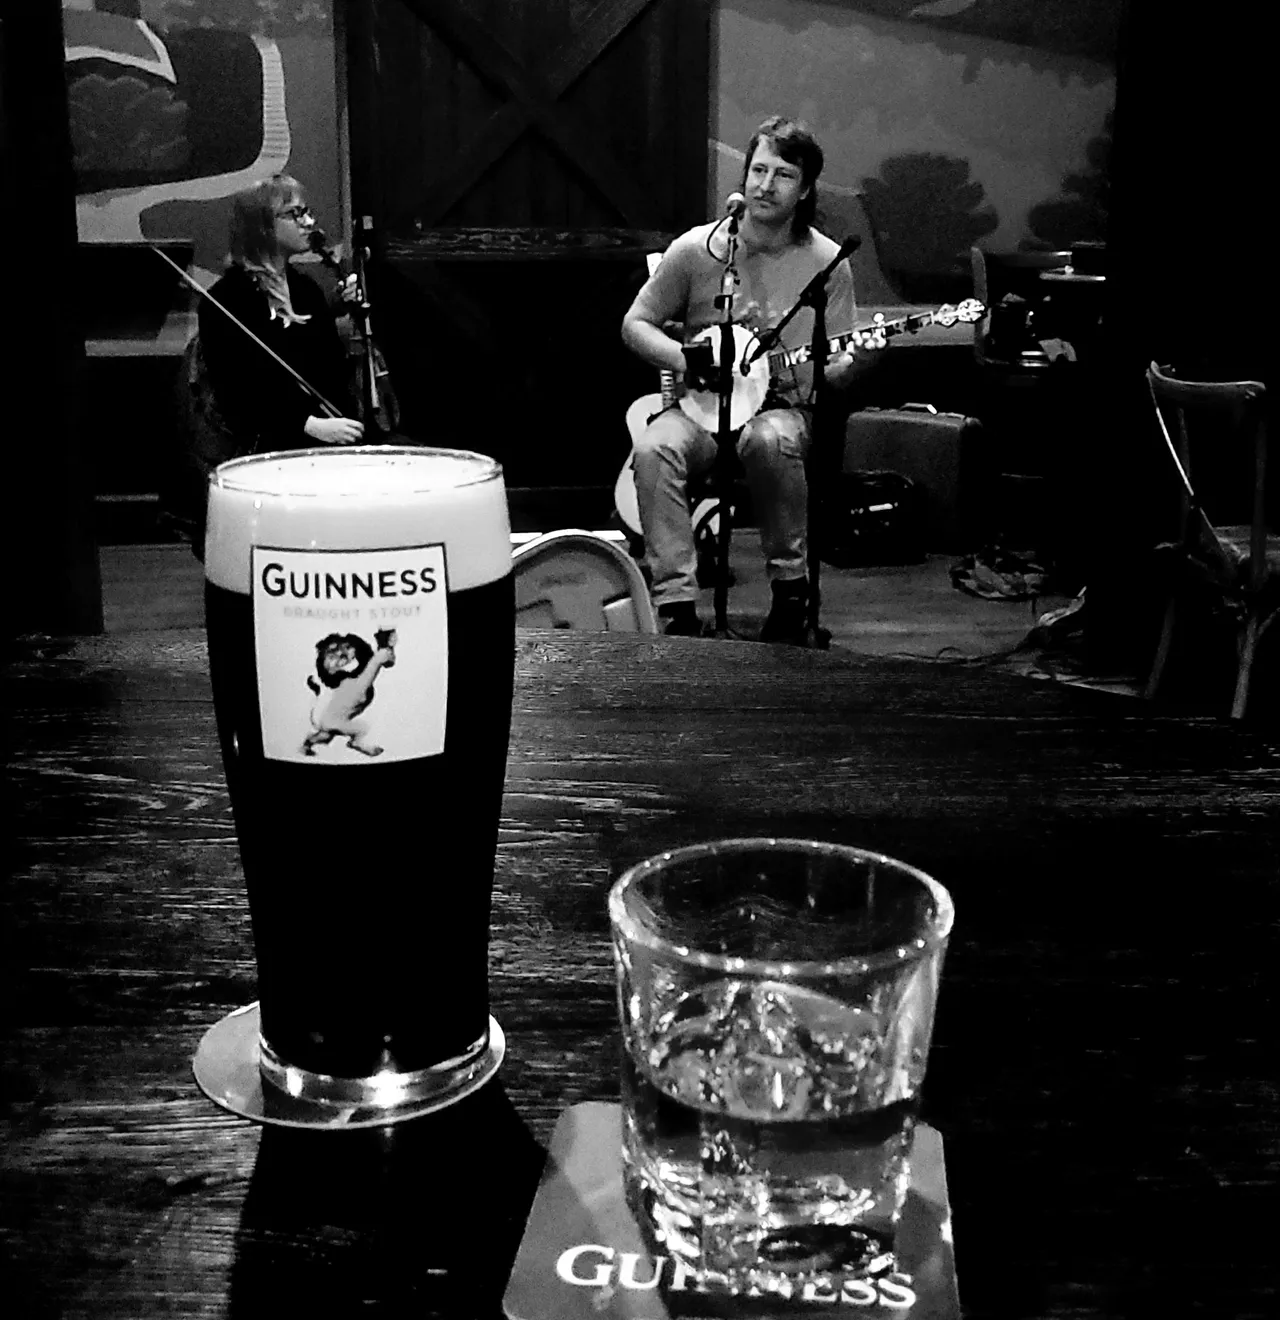 A Full glass of Guinness, a glass of clear liquor on a table in front of a banjo player and violinist.